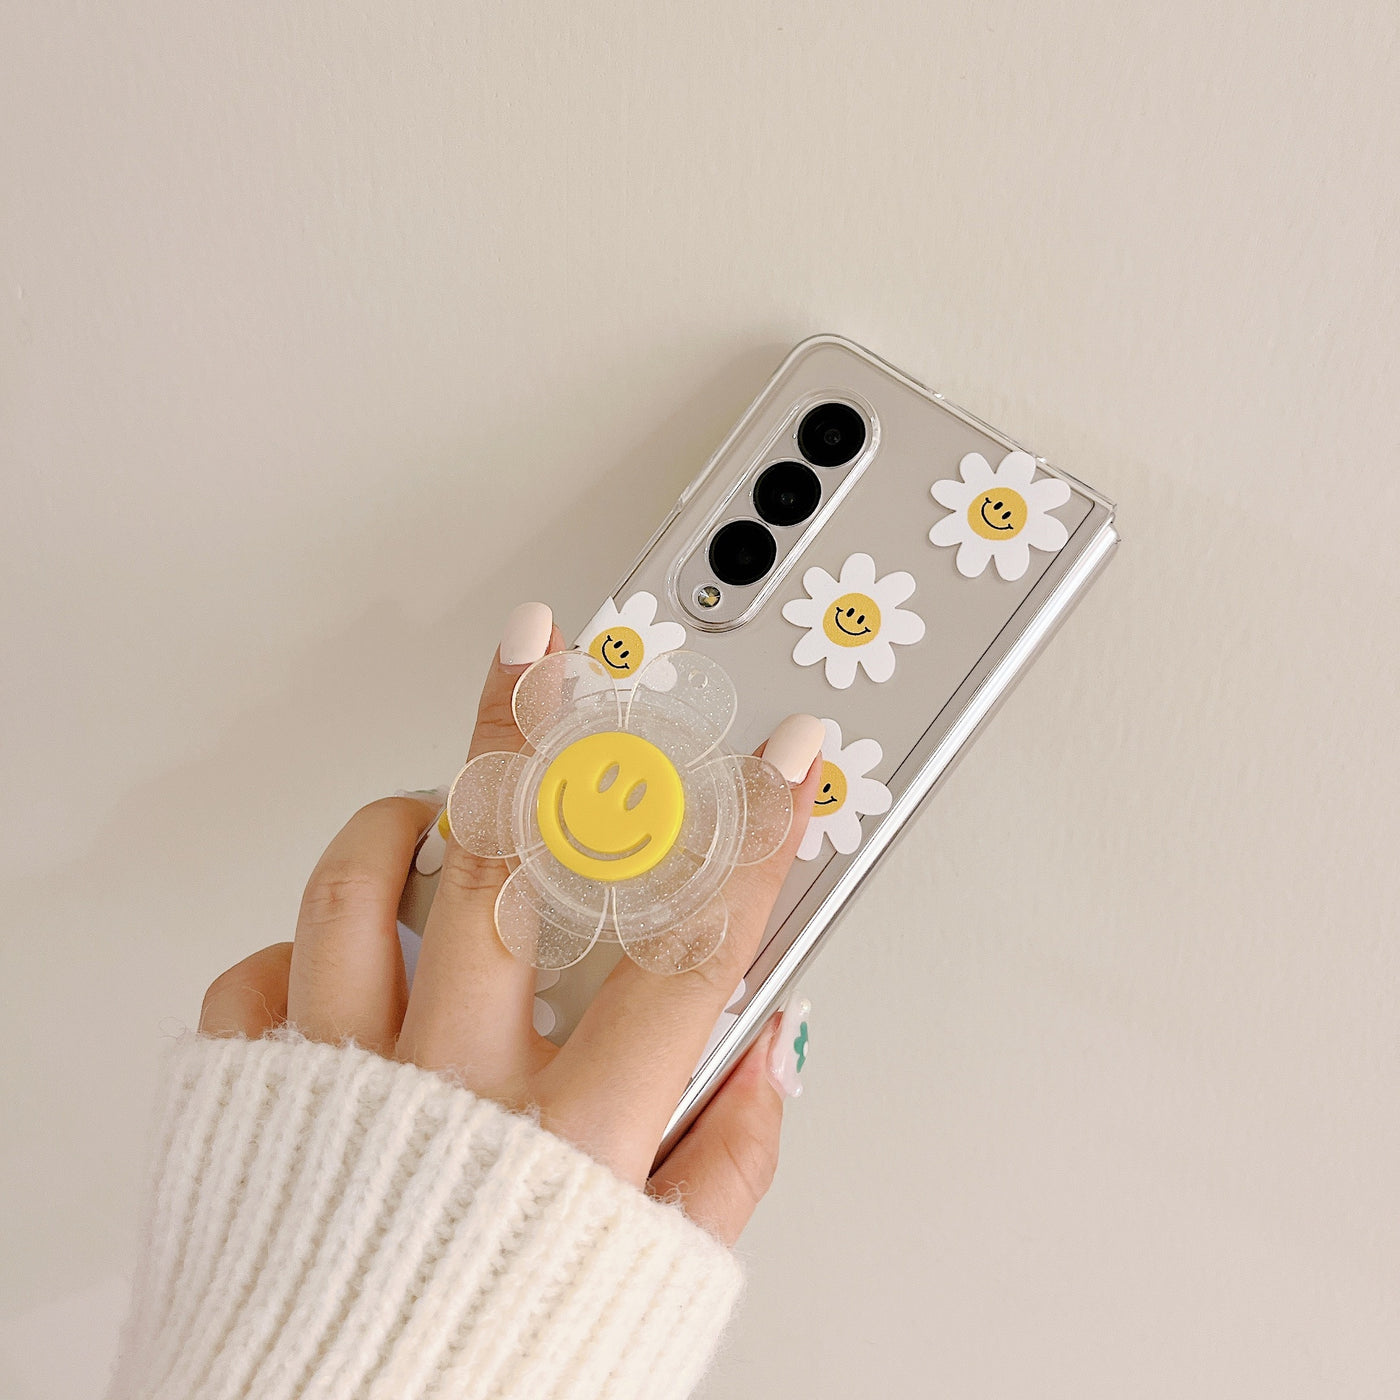 Cute Smile Sunflower HolderPhone Case For Samsung Galaxy Z Fold 3